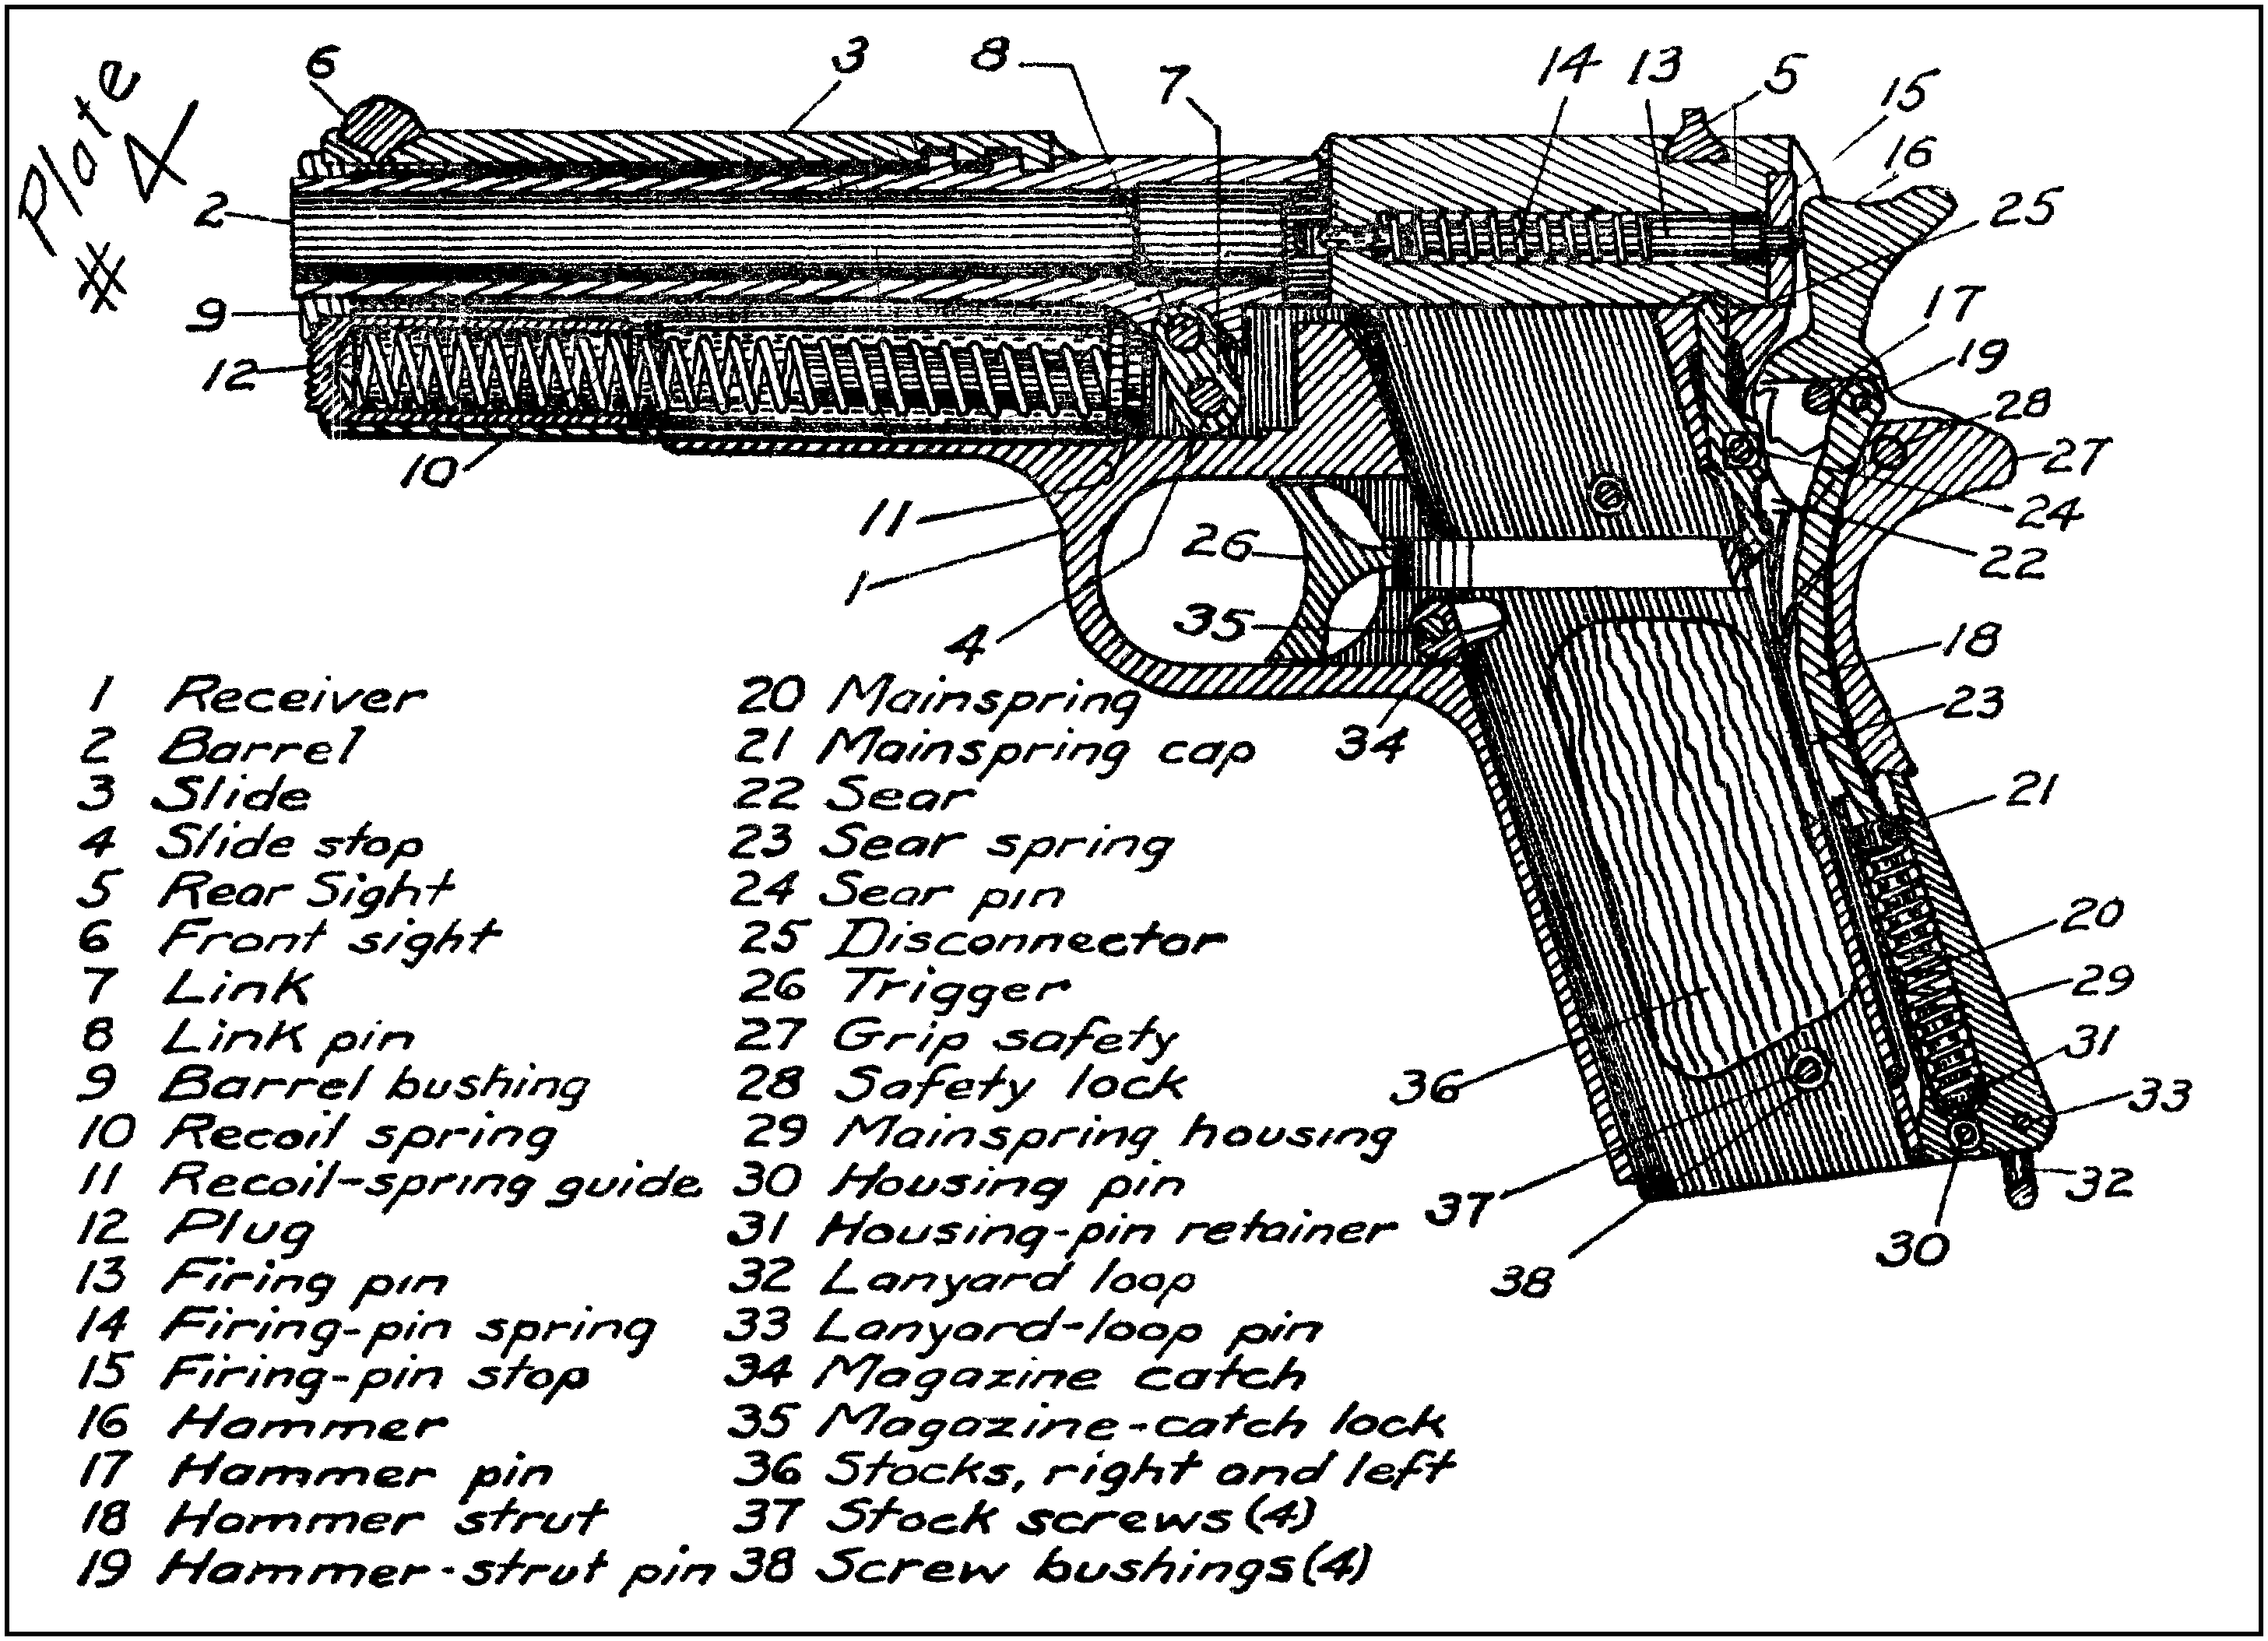 Plate 4: Small Arms